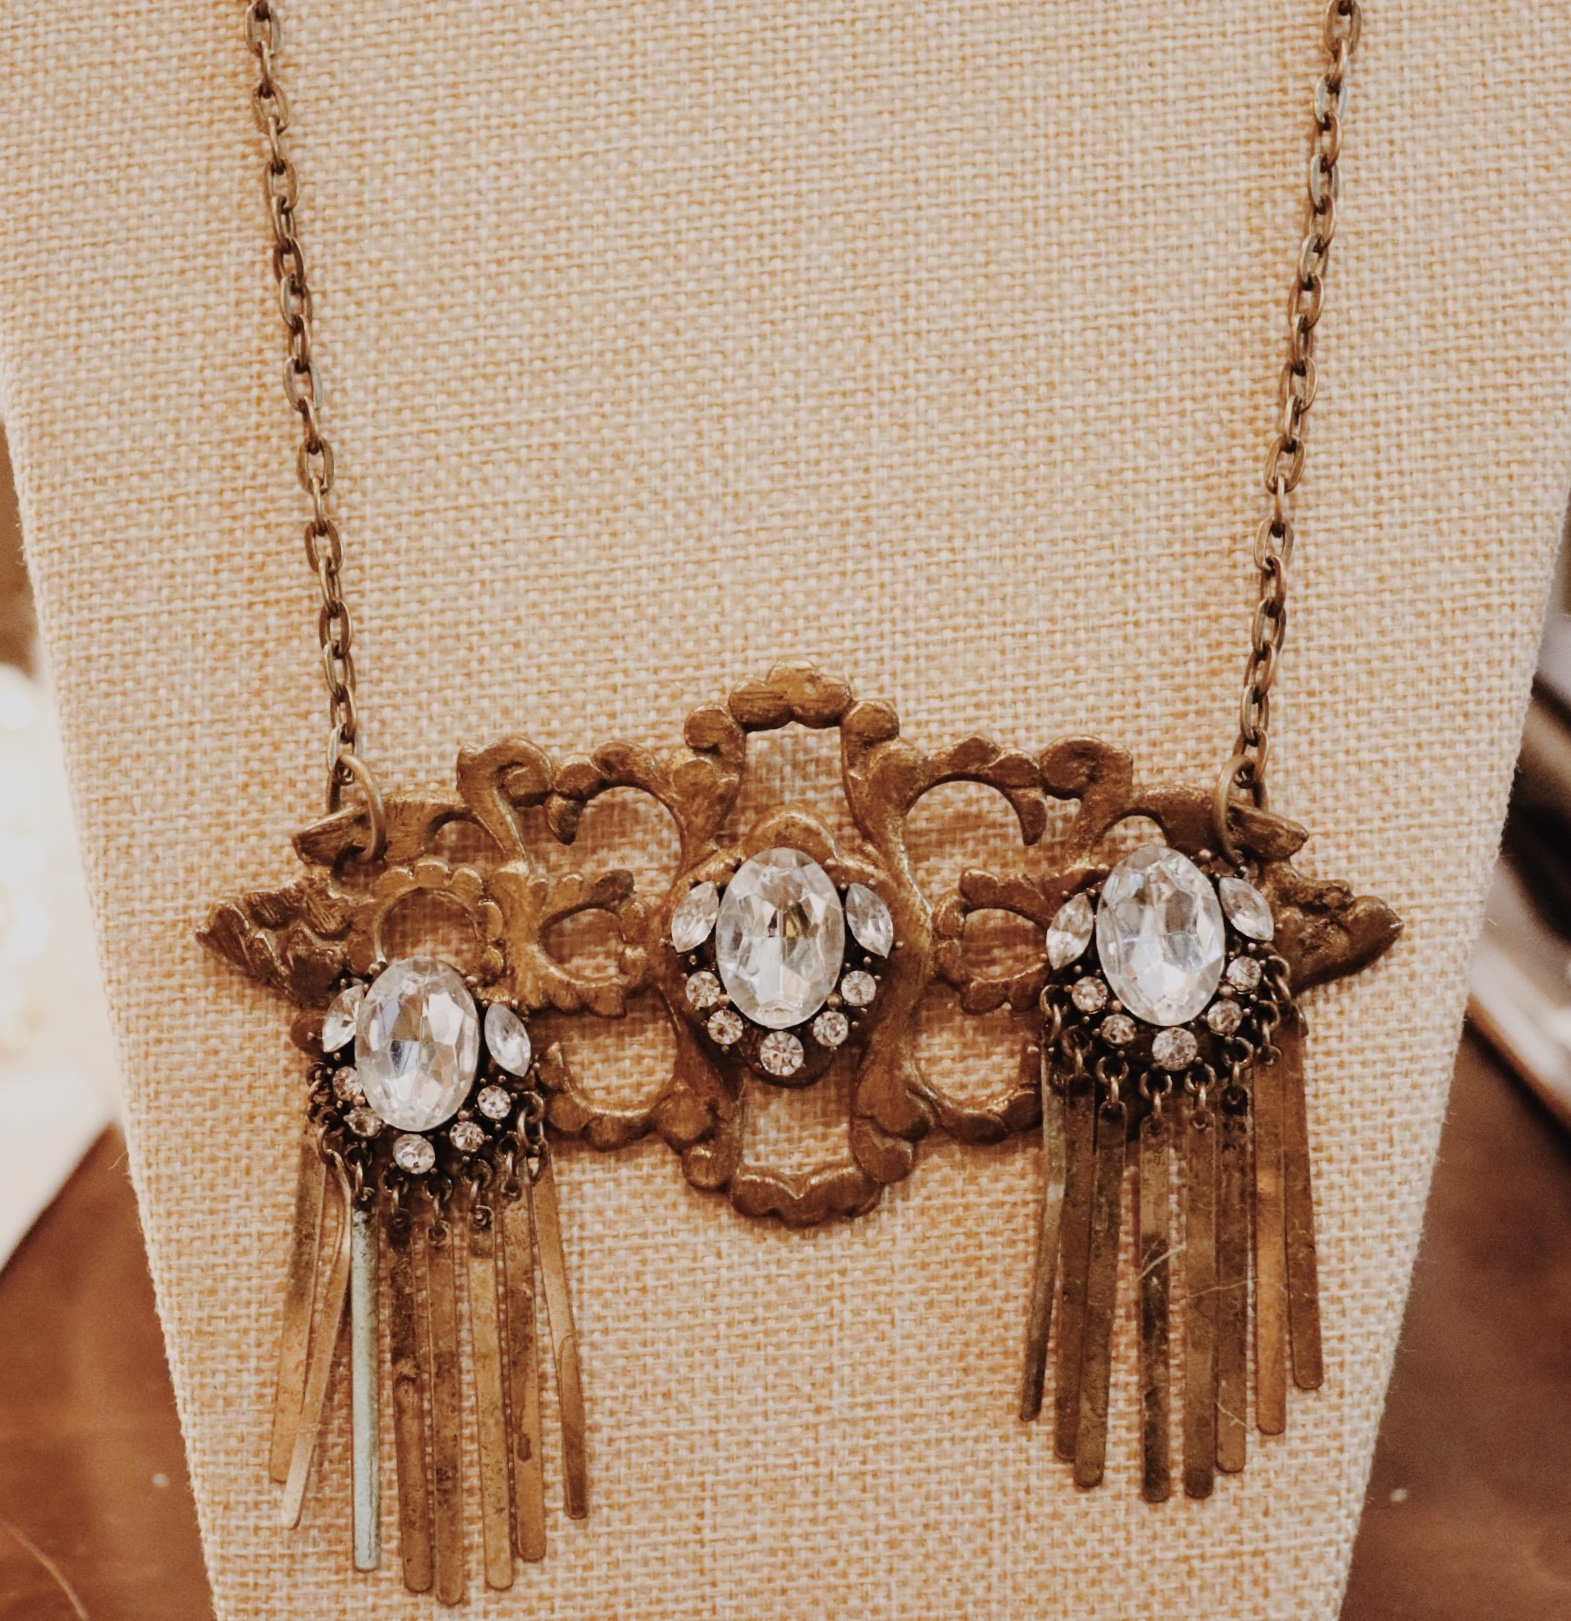 This fabulous handmade necklace is on a 22 inch chain and has a vintage handle as the centerpiece!